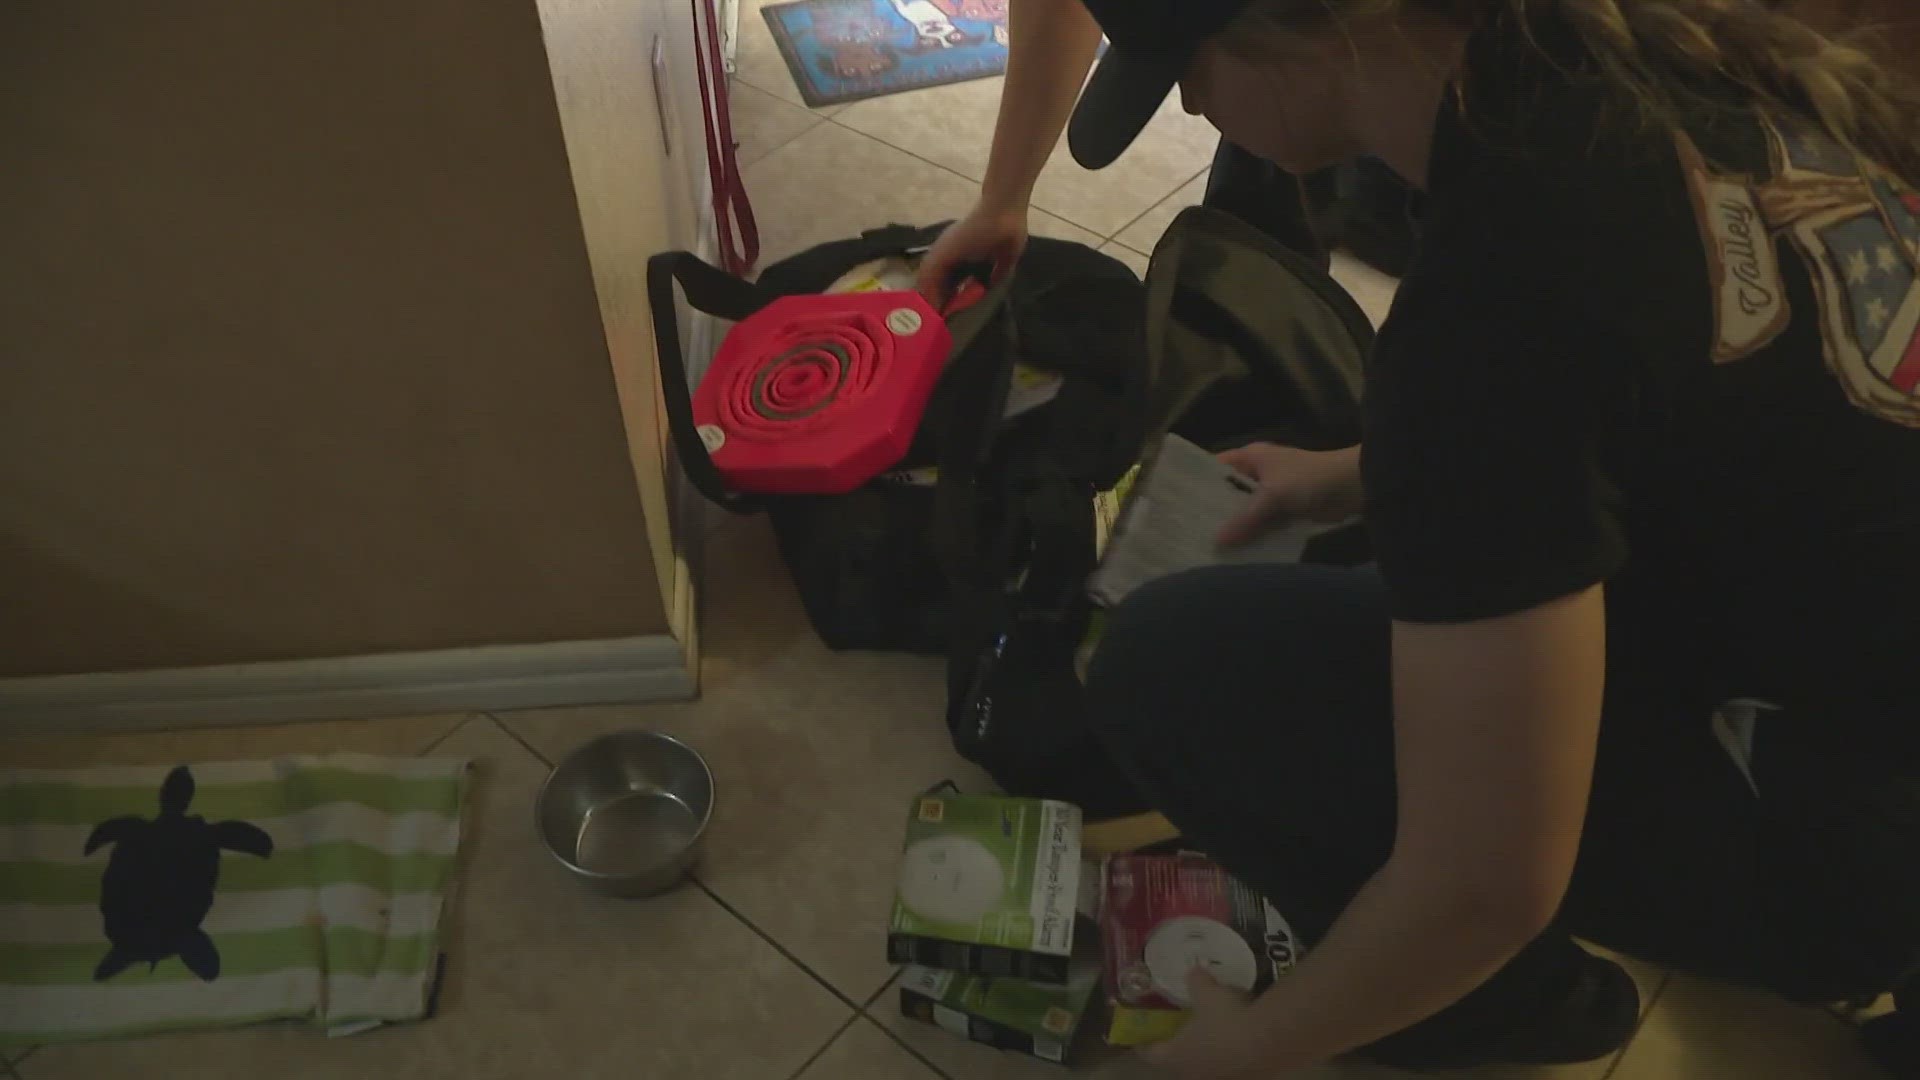 On Saturday, the Phoenix Fire Department was raising awareness about the need for working smoke detectors in homes following a deadly fire